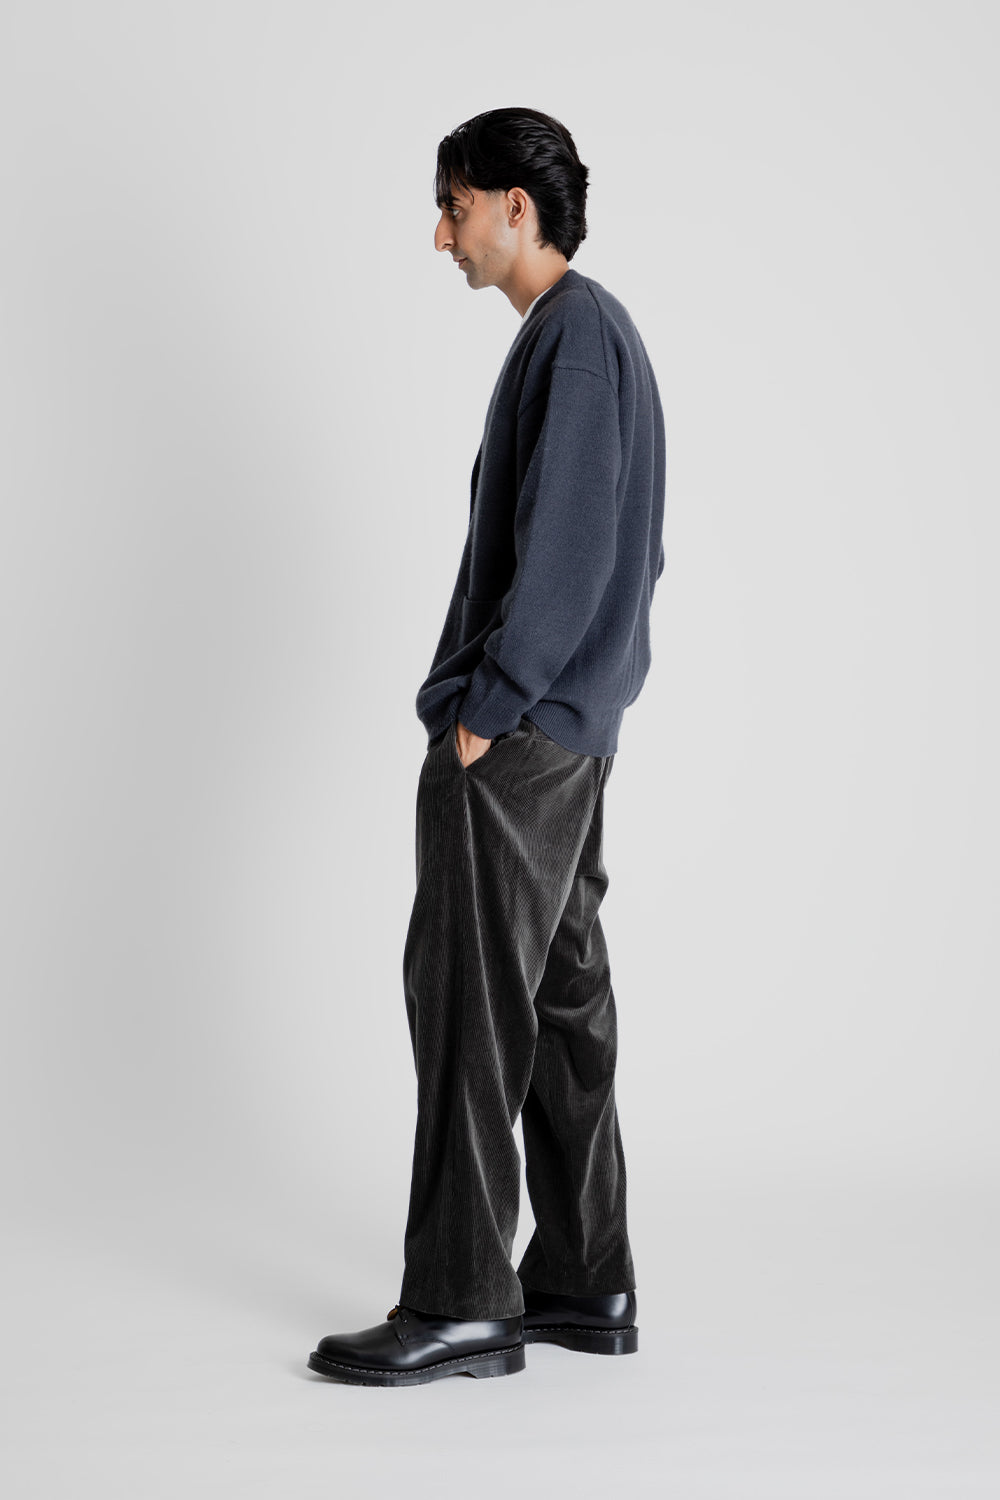 ATON Suvin Corduroy Easy Wide Pants in Charcoal Gray